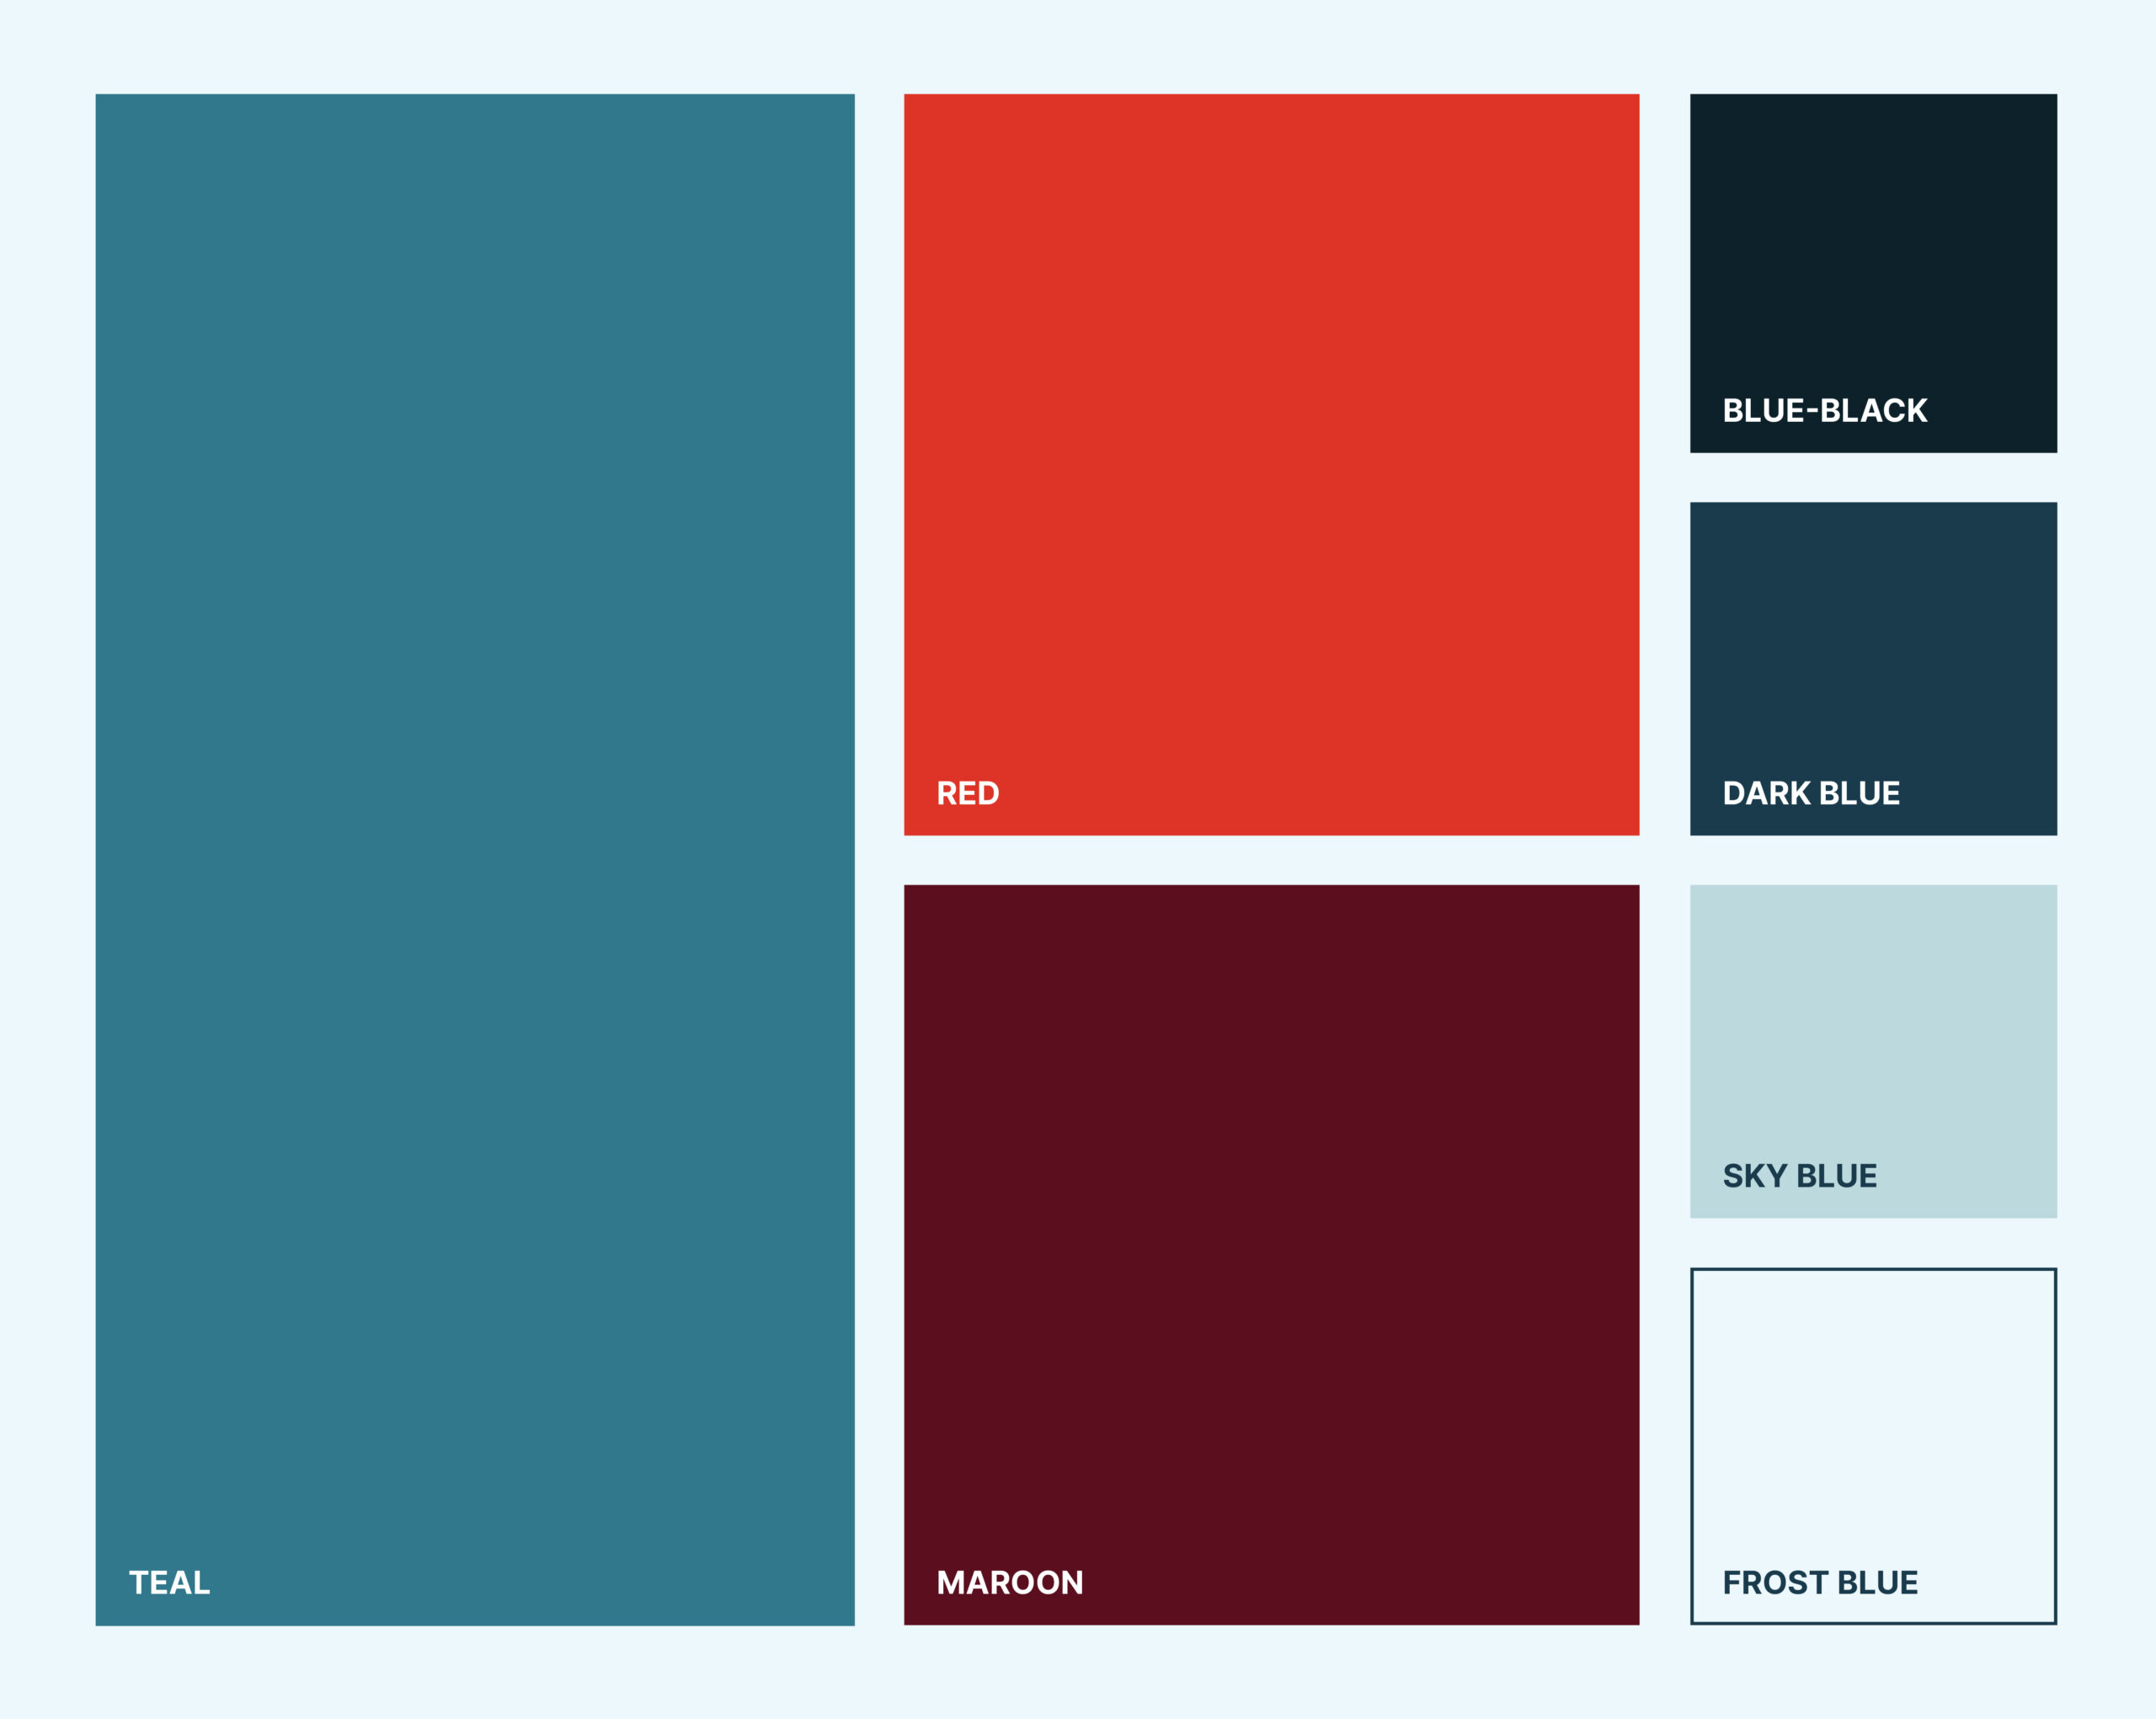 New brand colors for Crane Agency.